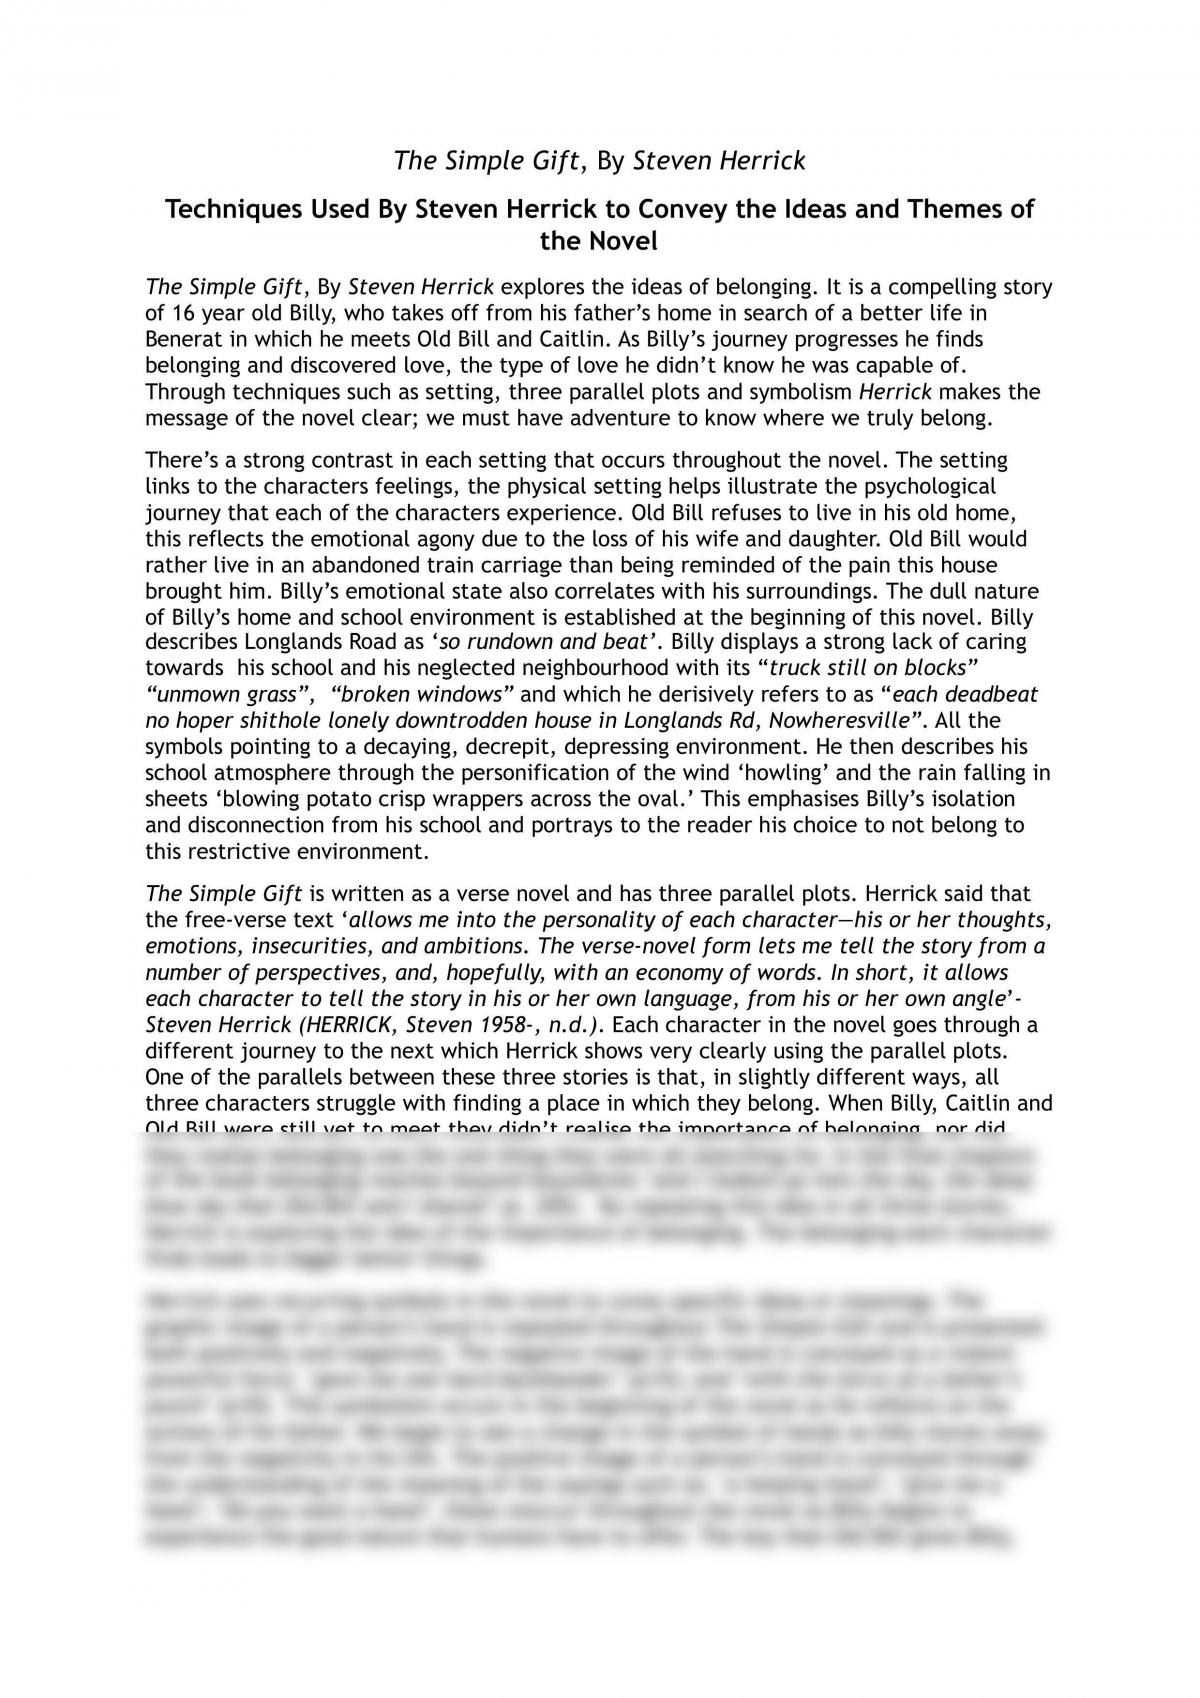 The Simple Gift Essay - Page 1